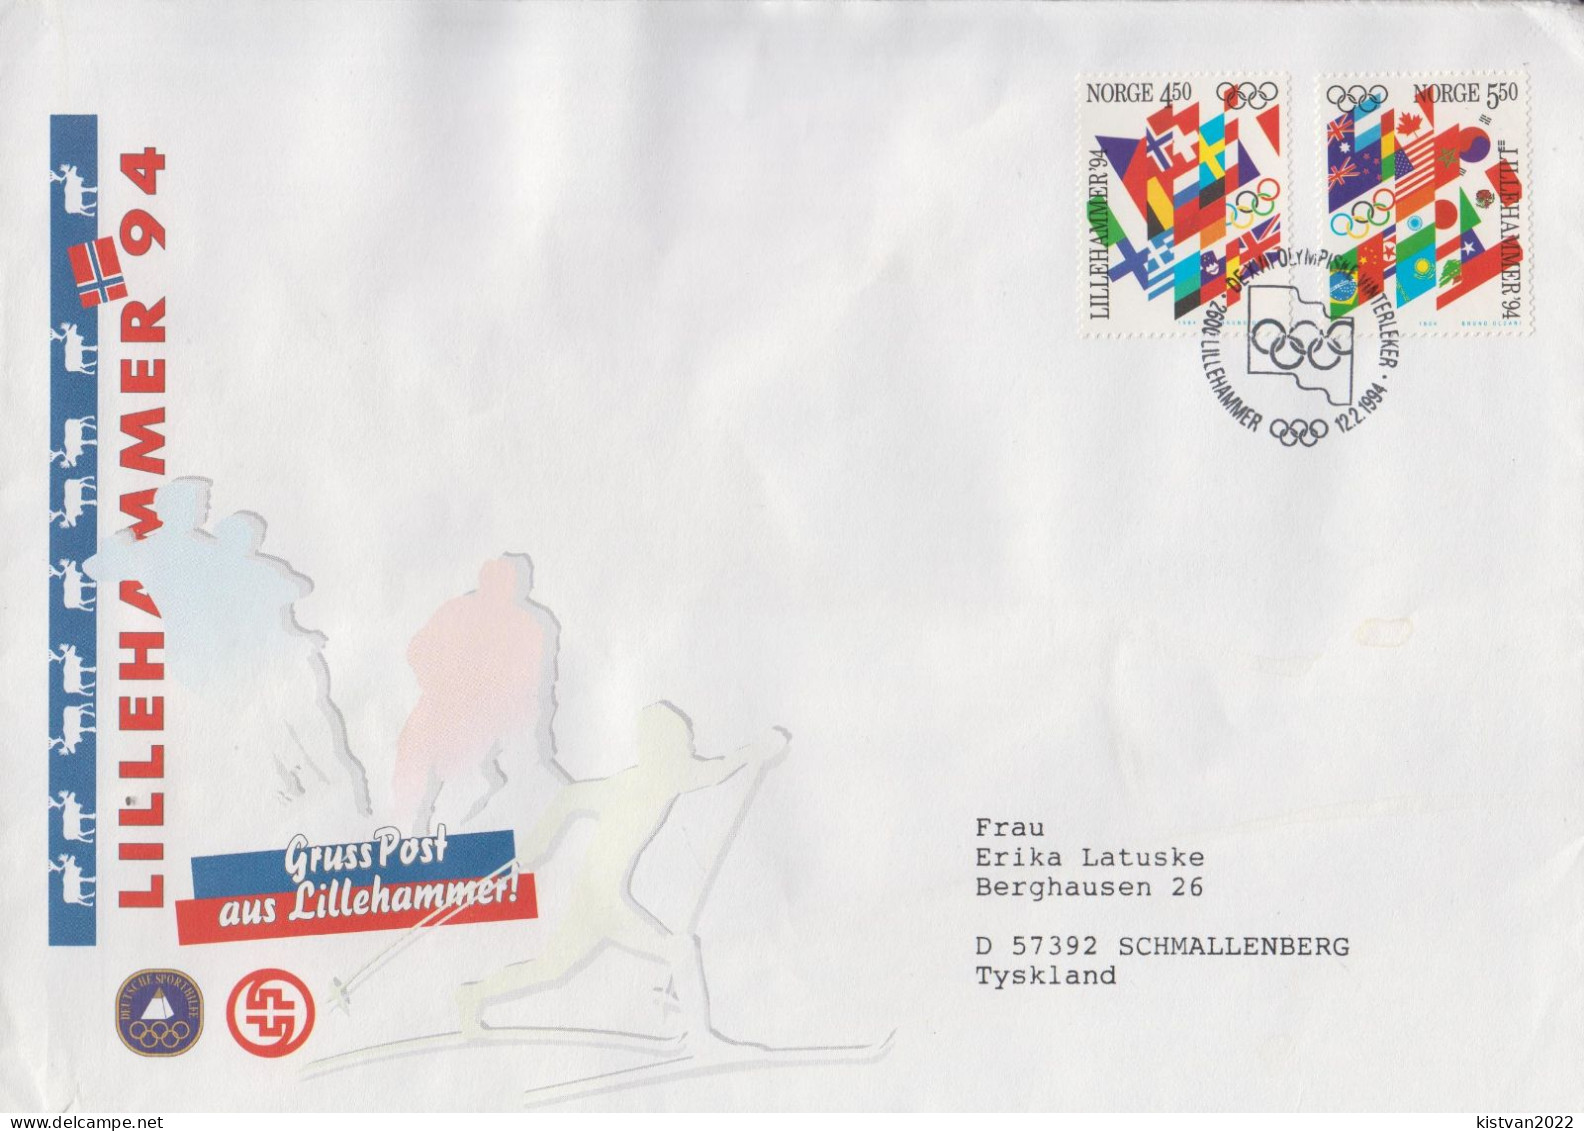 Postal History: Norway Cover With Lillehammer Cancel - Winter 1994: Lillehammer